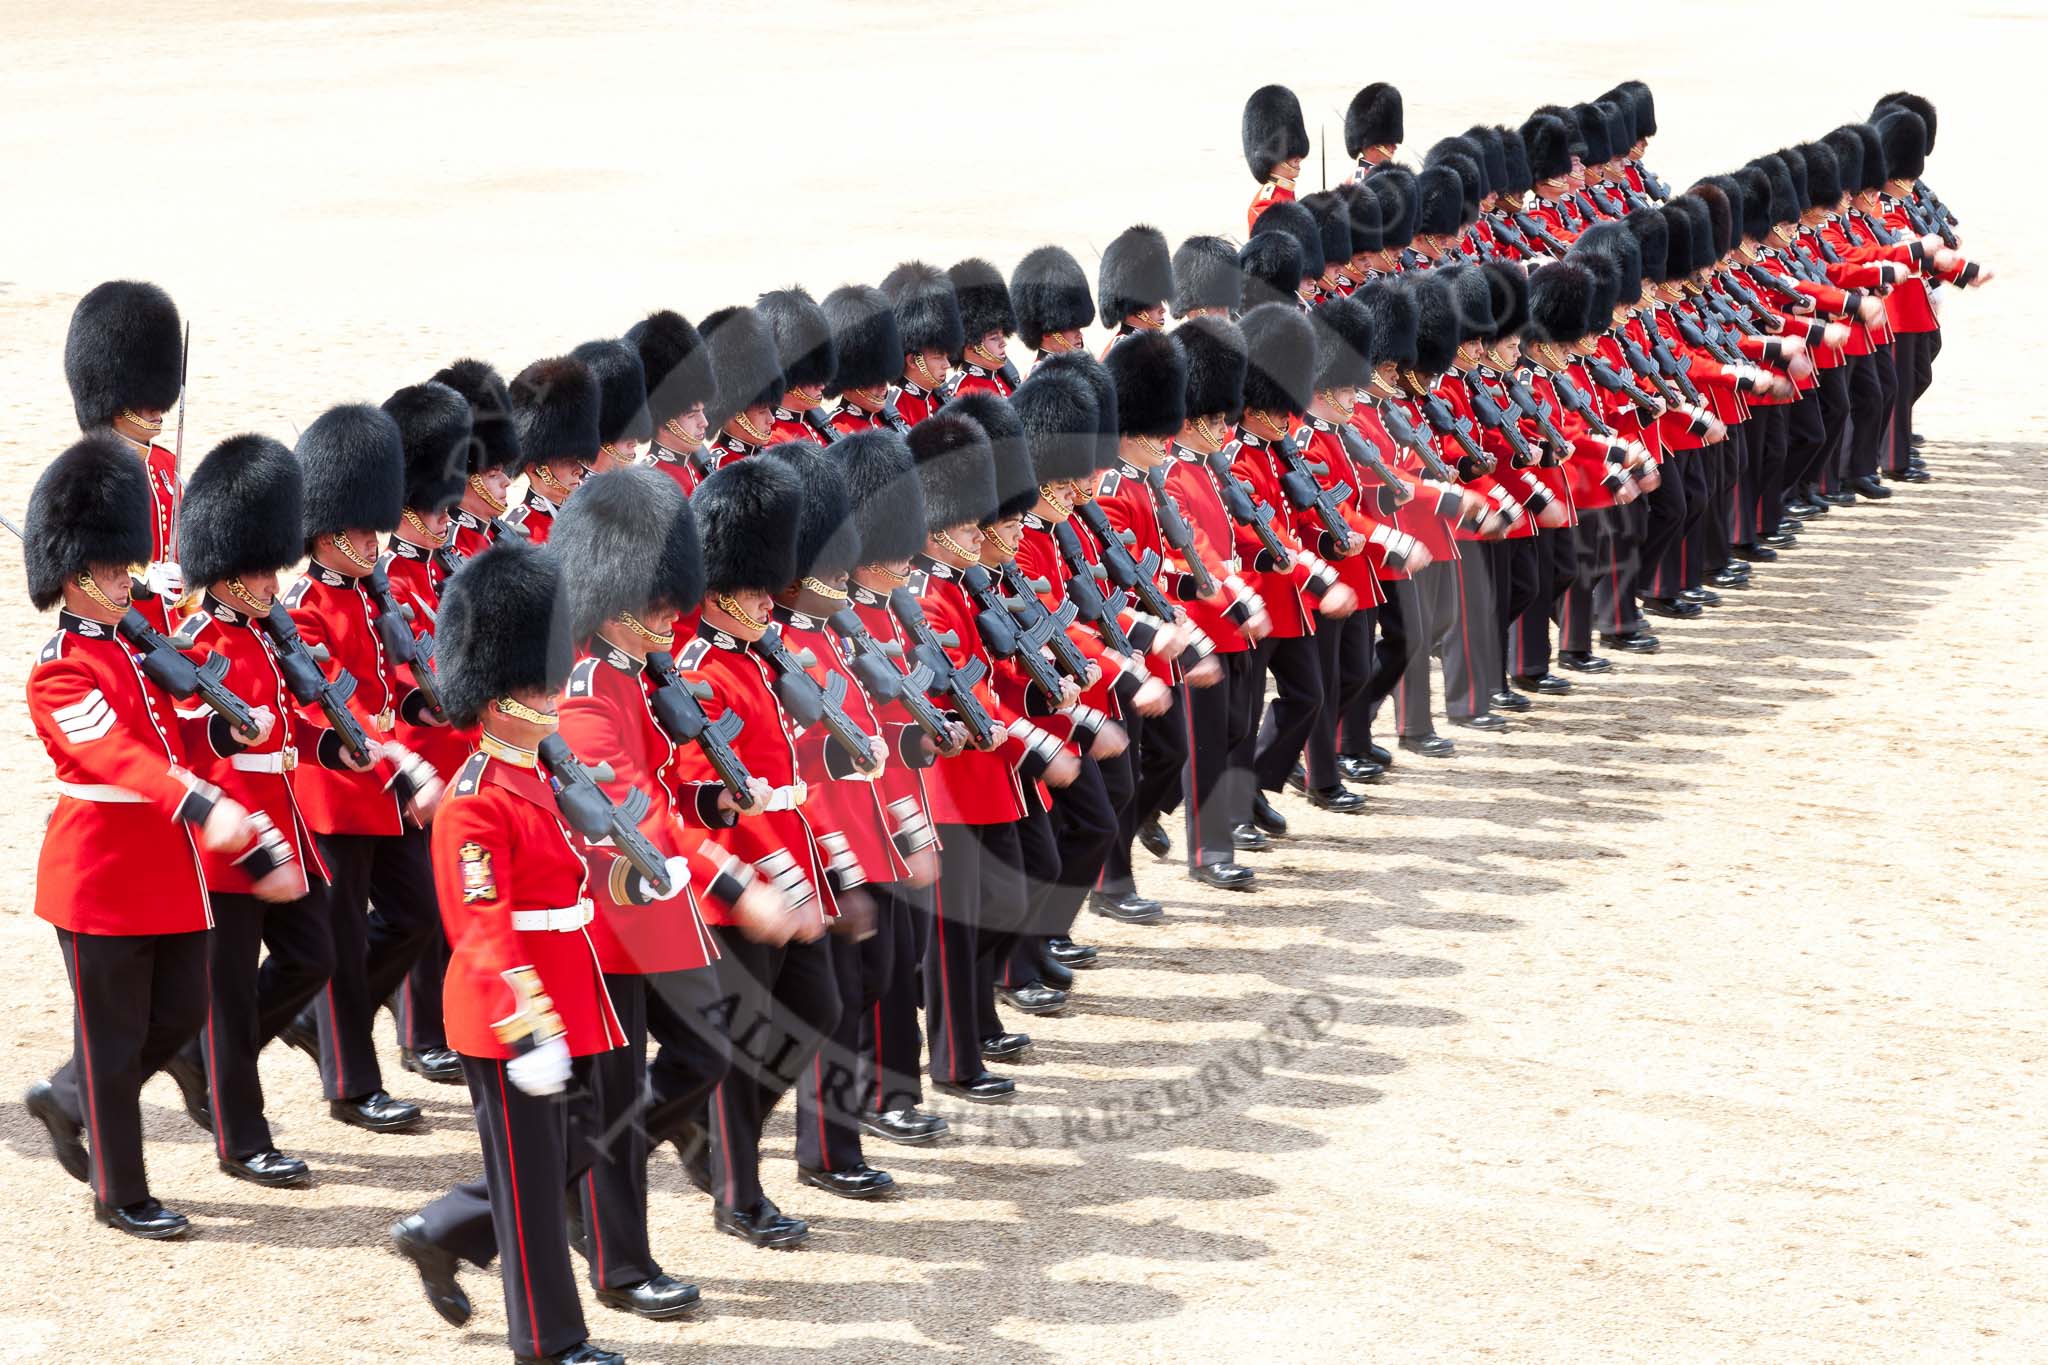 The Colonel's Review 2011: No. 2 Guard, B Company Scots Guards, during the March Past by the Foot Guards in quick time..
Horse Guards Parade, Westminster,
London SW1,

United Kingdom,
on 04 June 2011 at 11:45, image #209